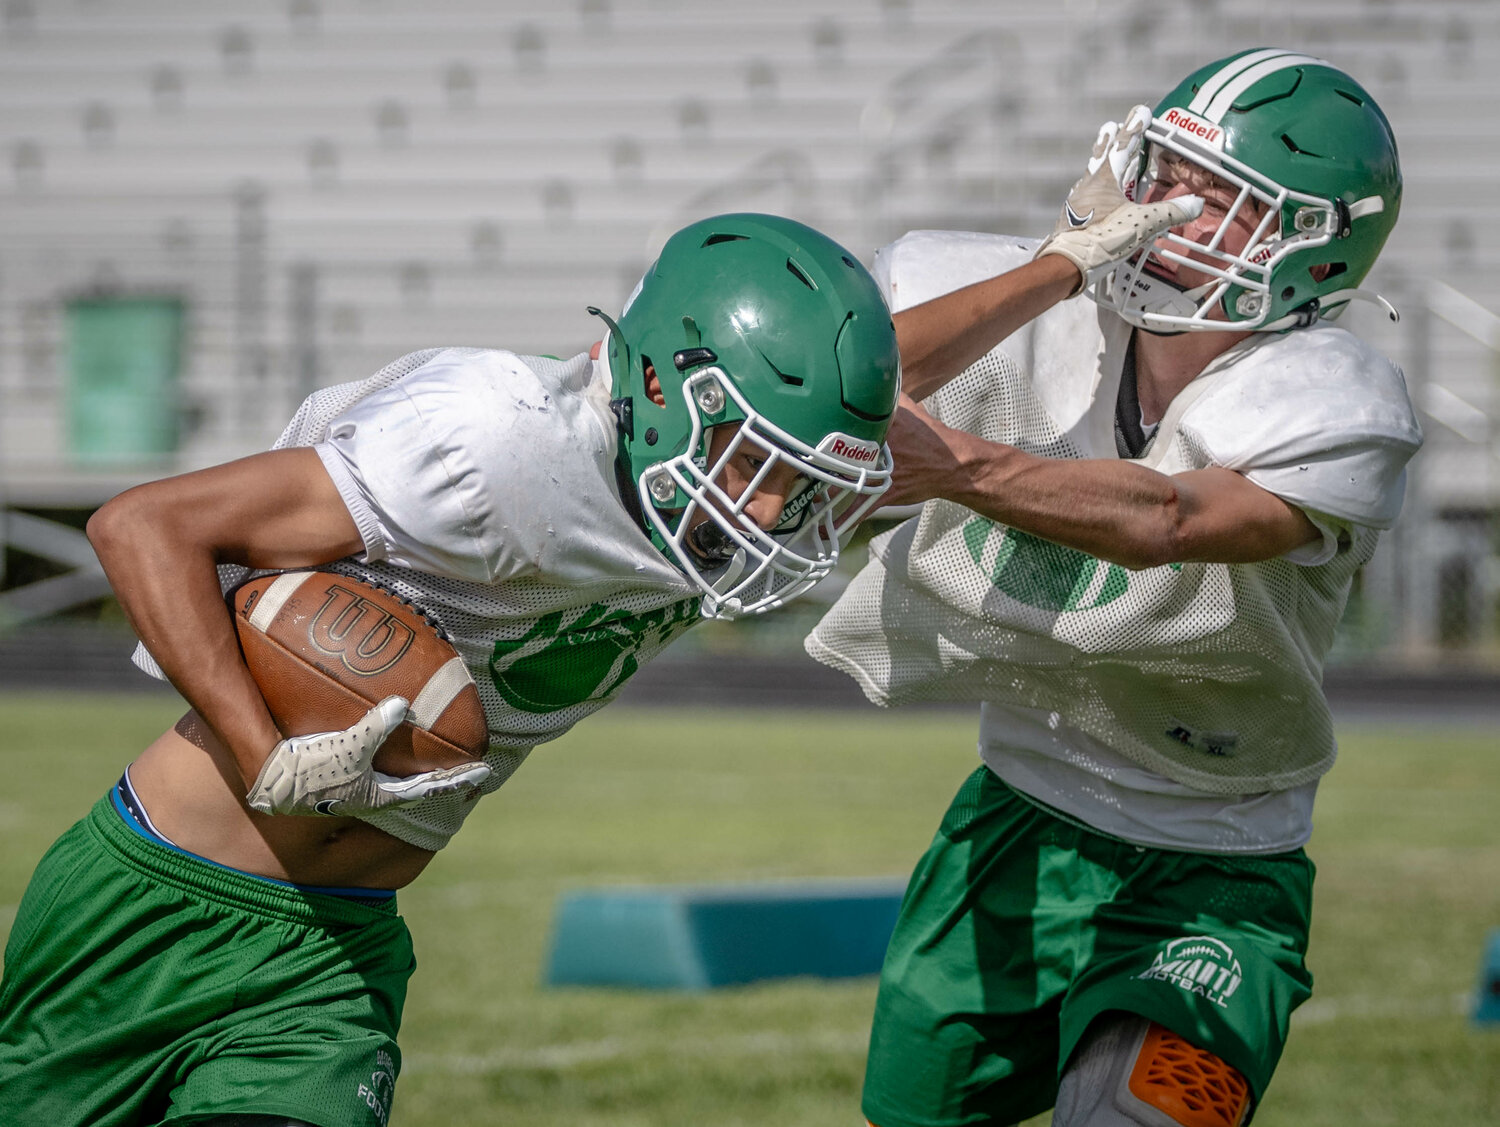 Moriarty’s Isaiah Quintana, left, looking to go around a defender during practice.